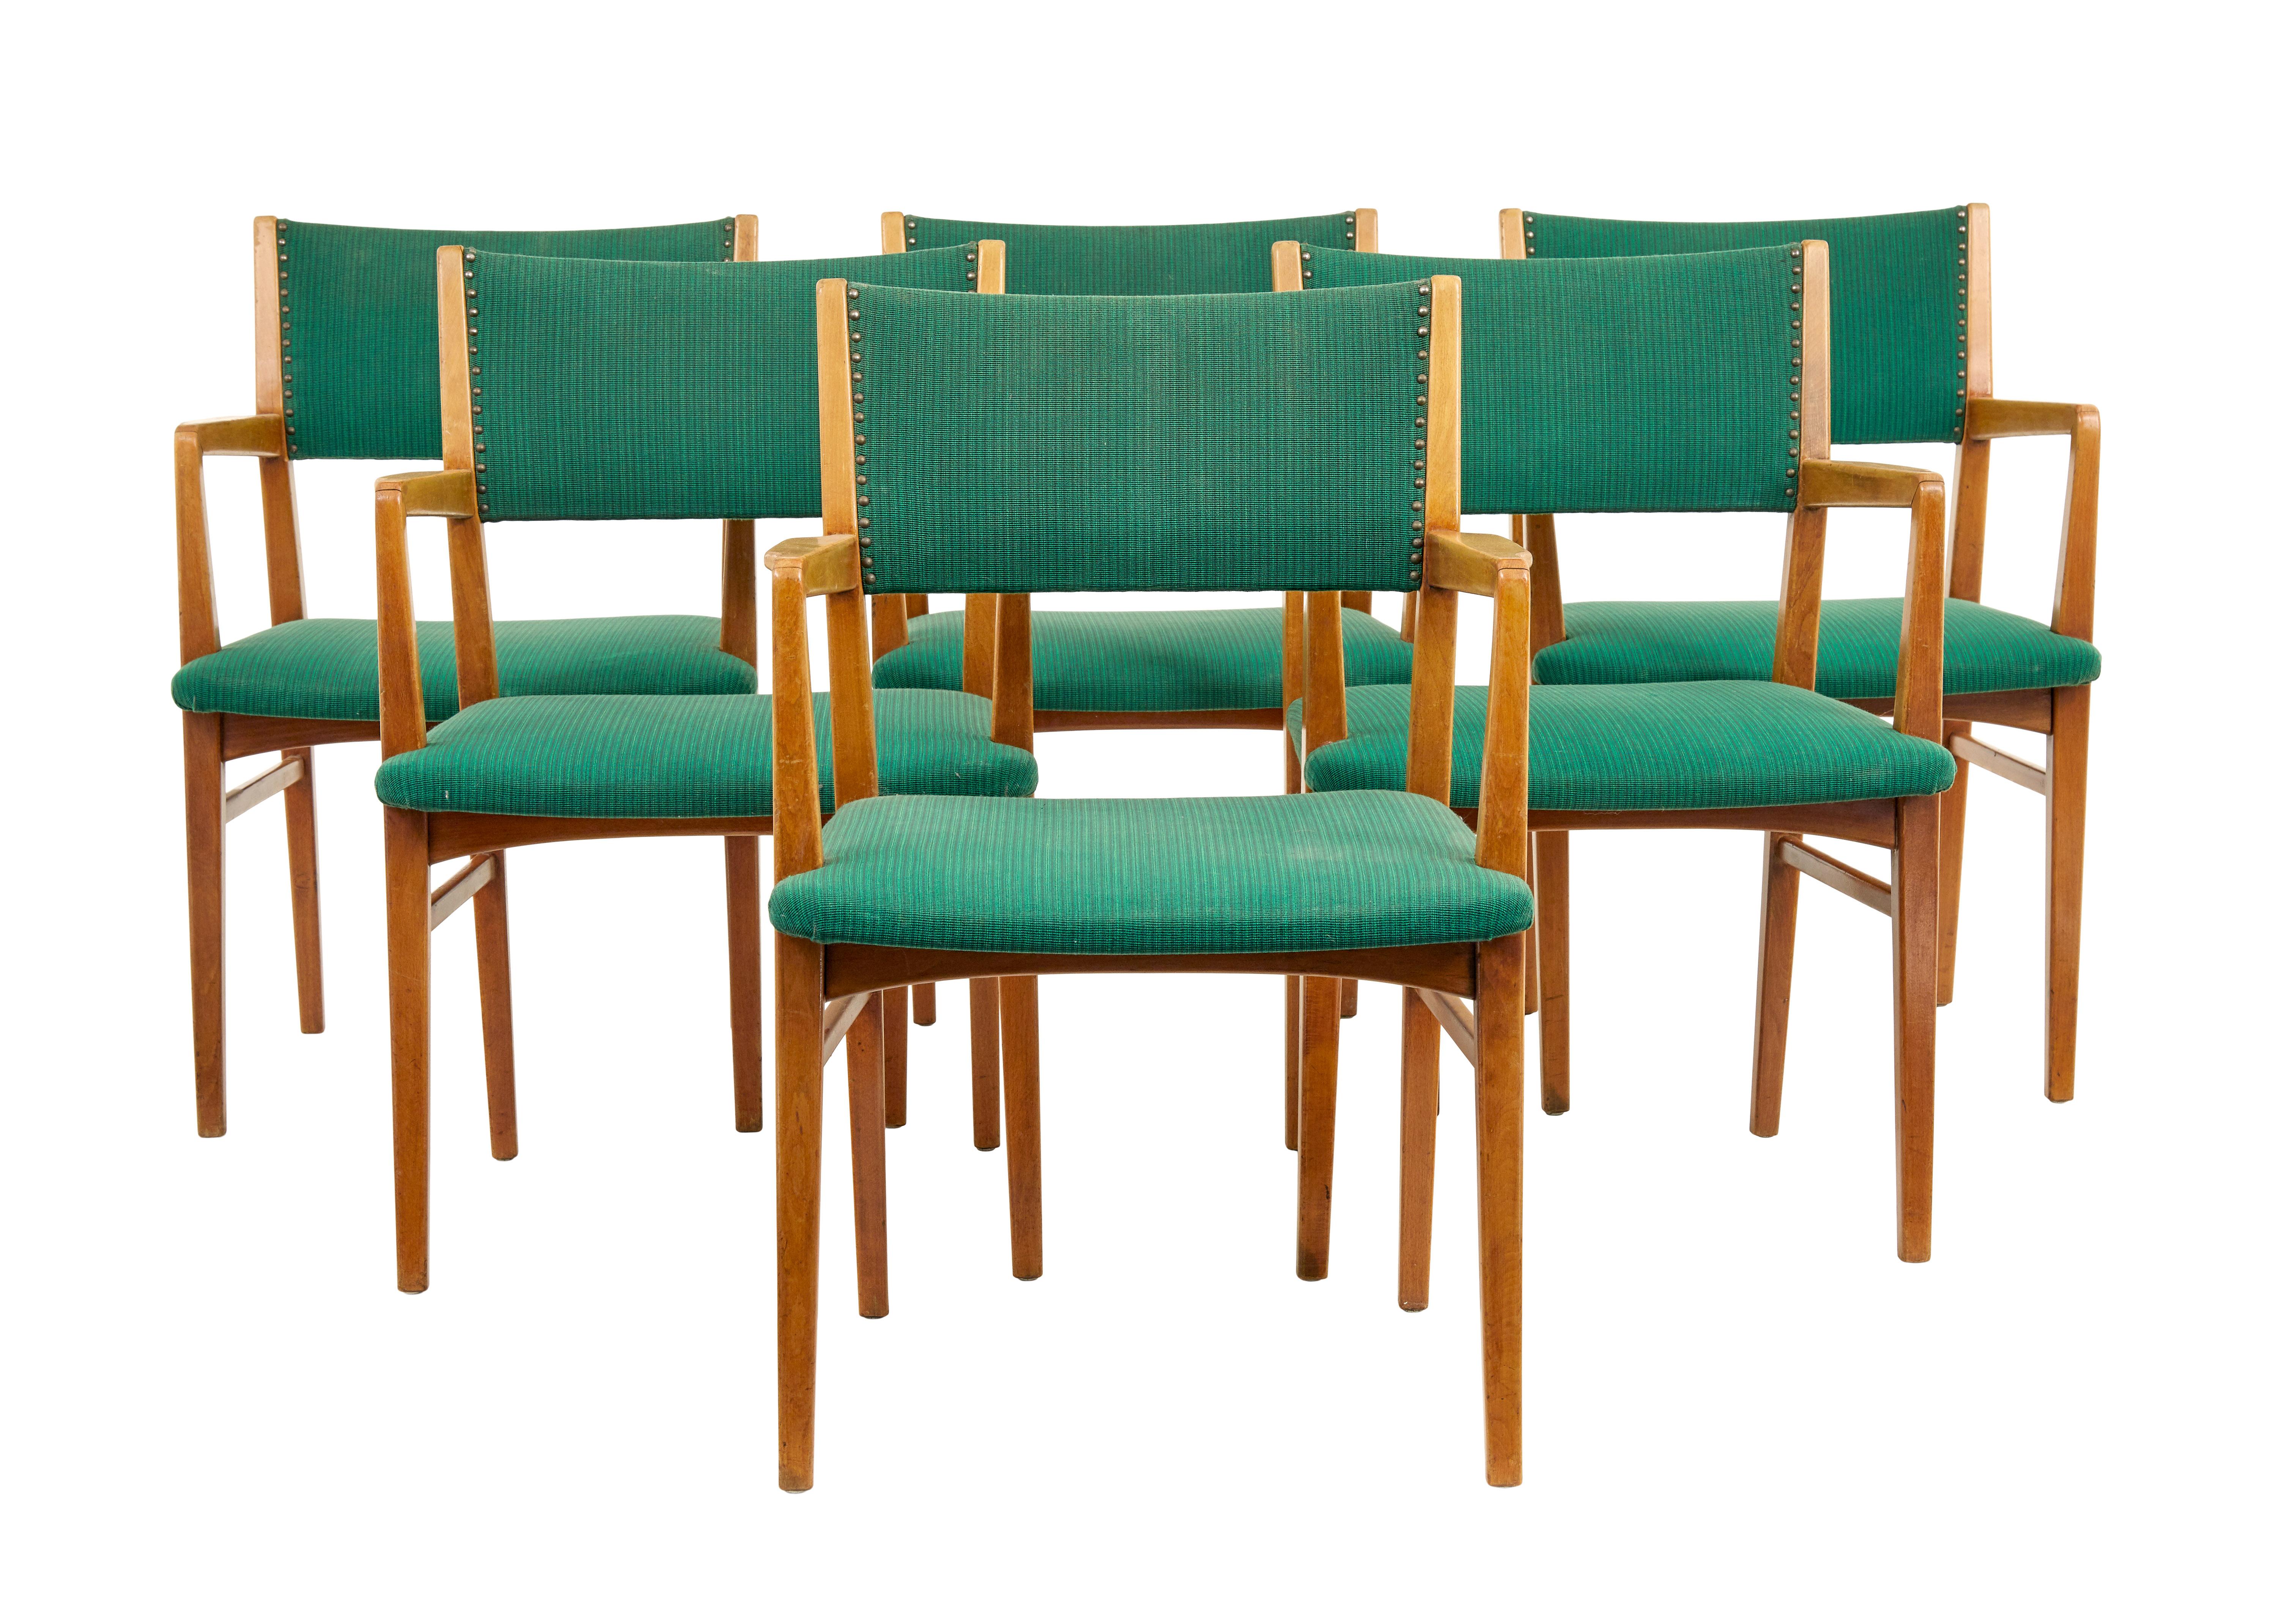 Set of 6 mid 20th century scandinavian armchairs circa 1960.

Good quality set of swedish office chairs which could now serve well as dining chairs.  Very comfortable and made in solid beech.  Upholstered in contrasting green fabric.

Surface marks